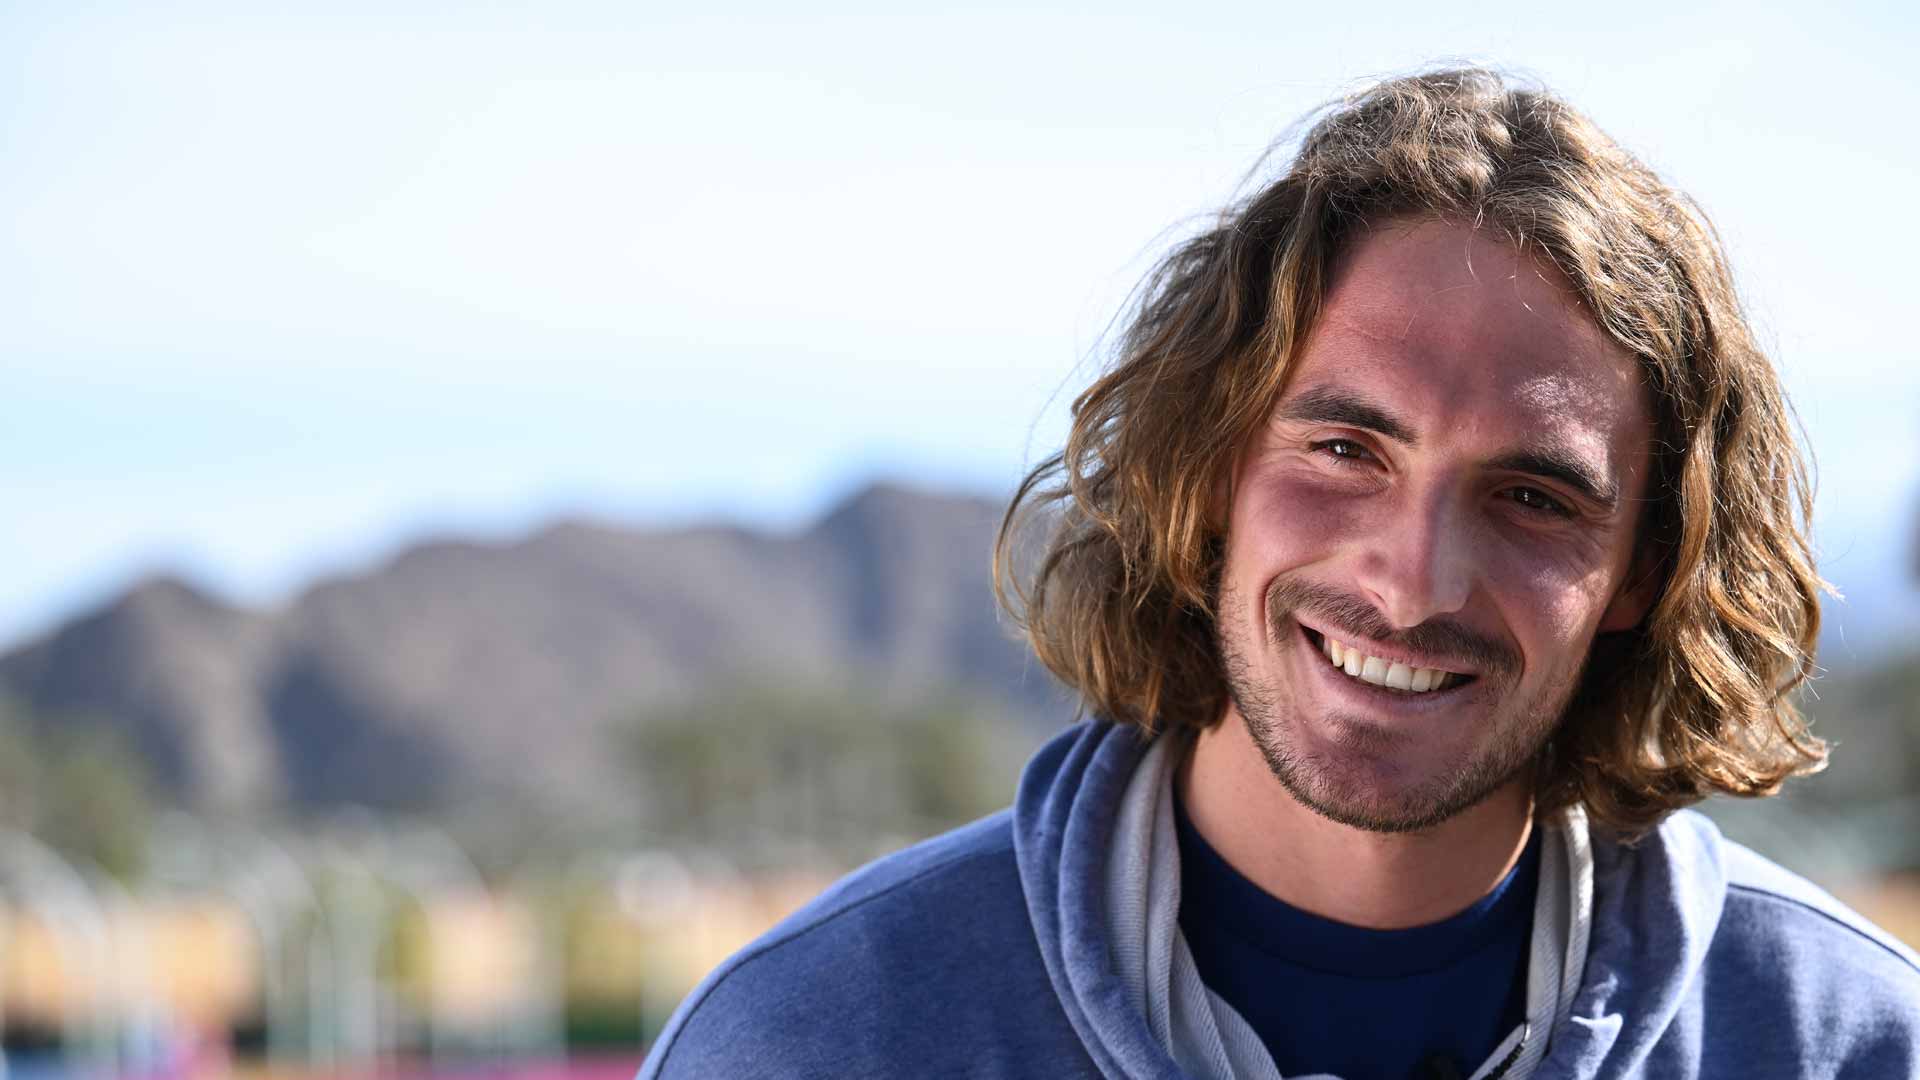 Stefanos Tsitsipas meets with the media in Indian Wells.